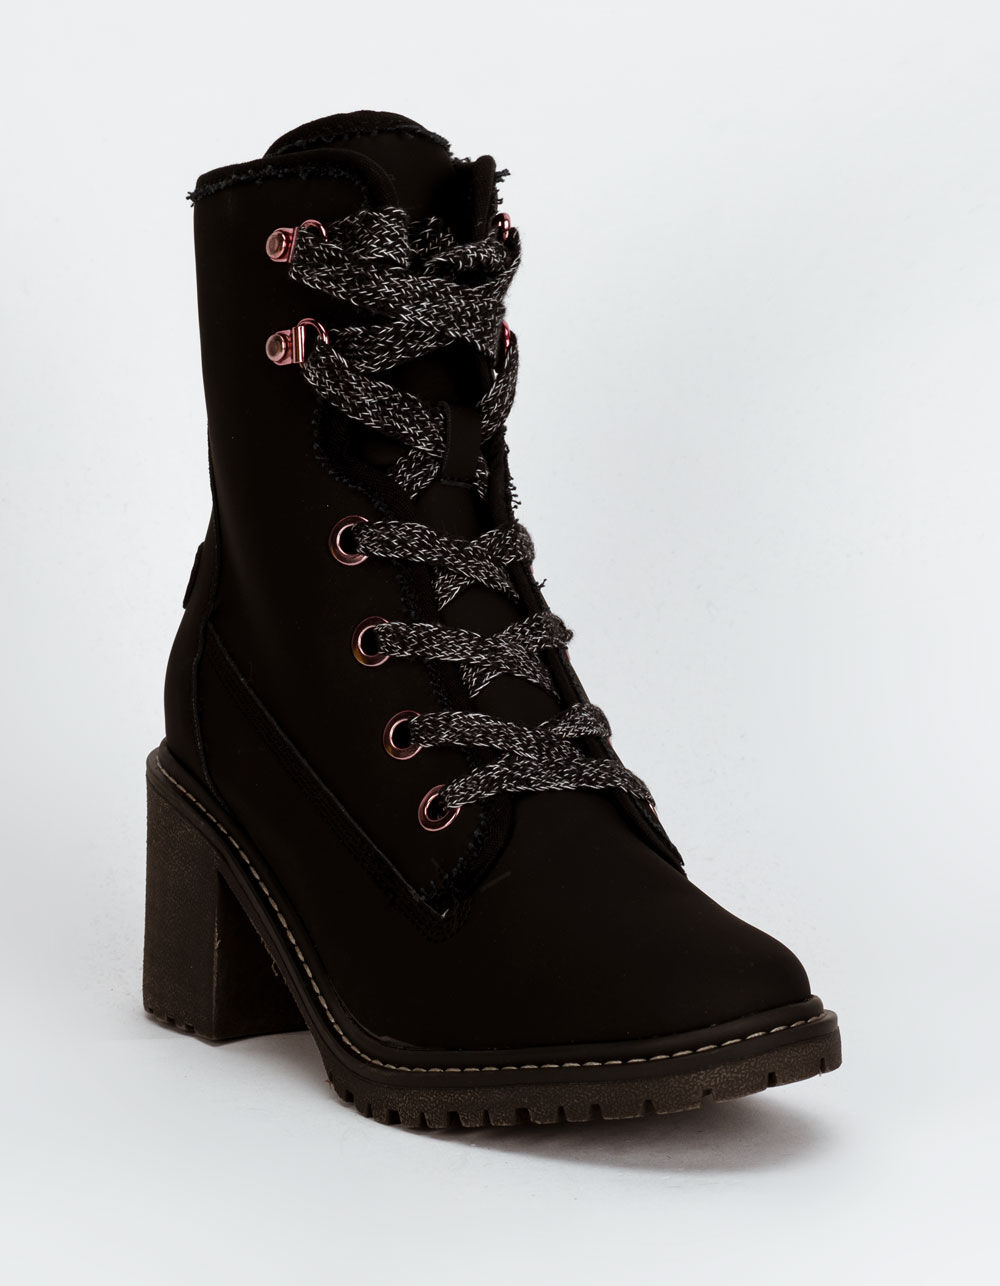 ROXY Out And About Heeled Lace Up Boots